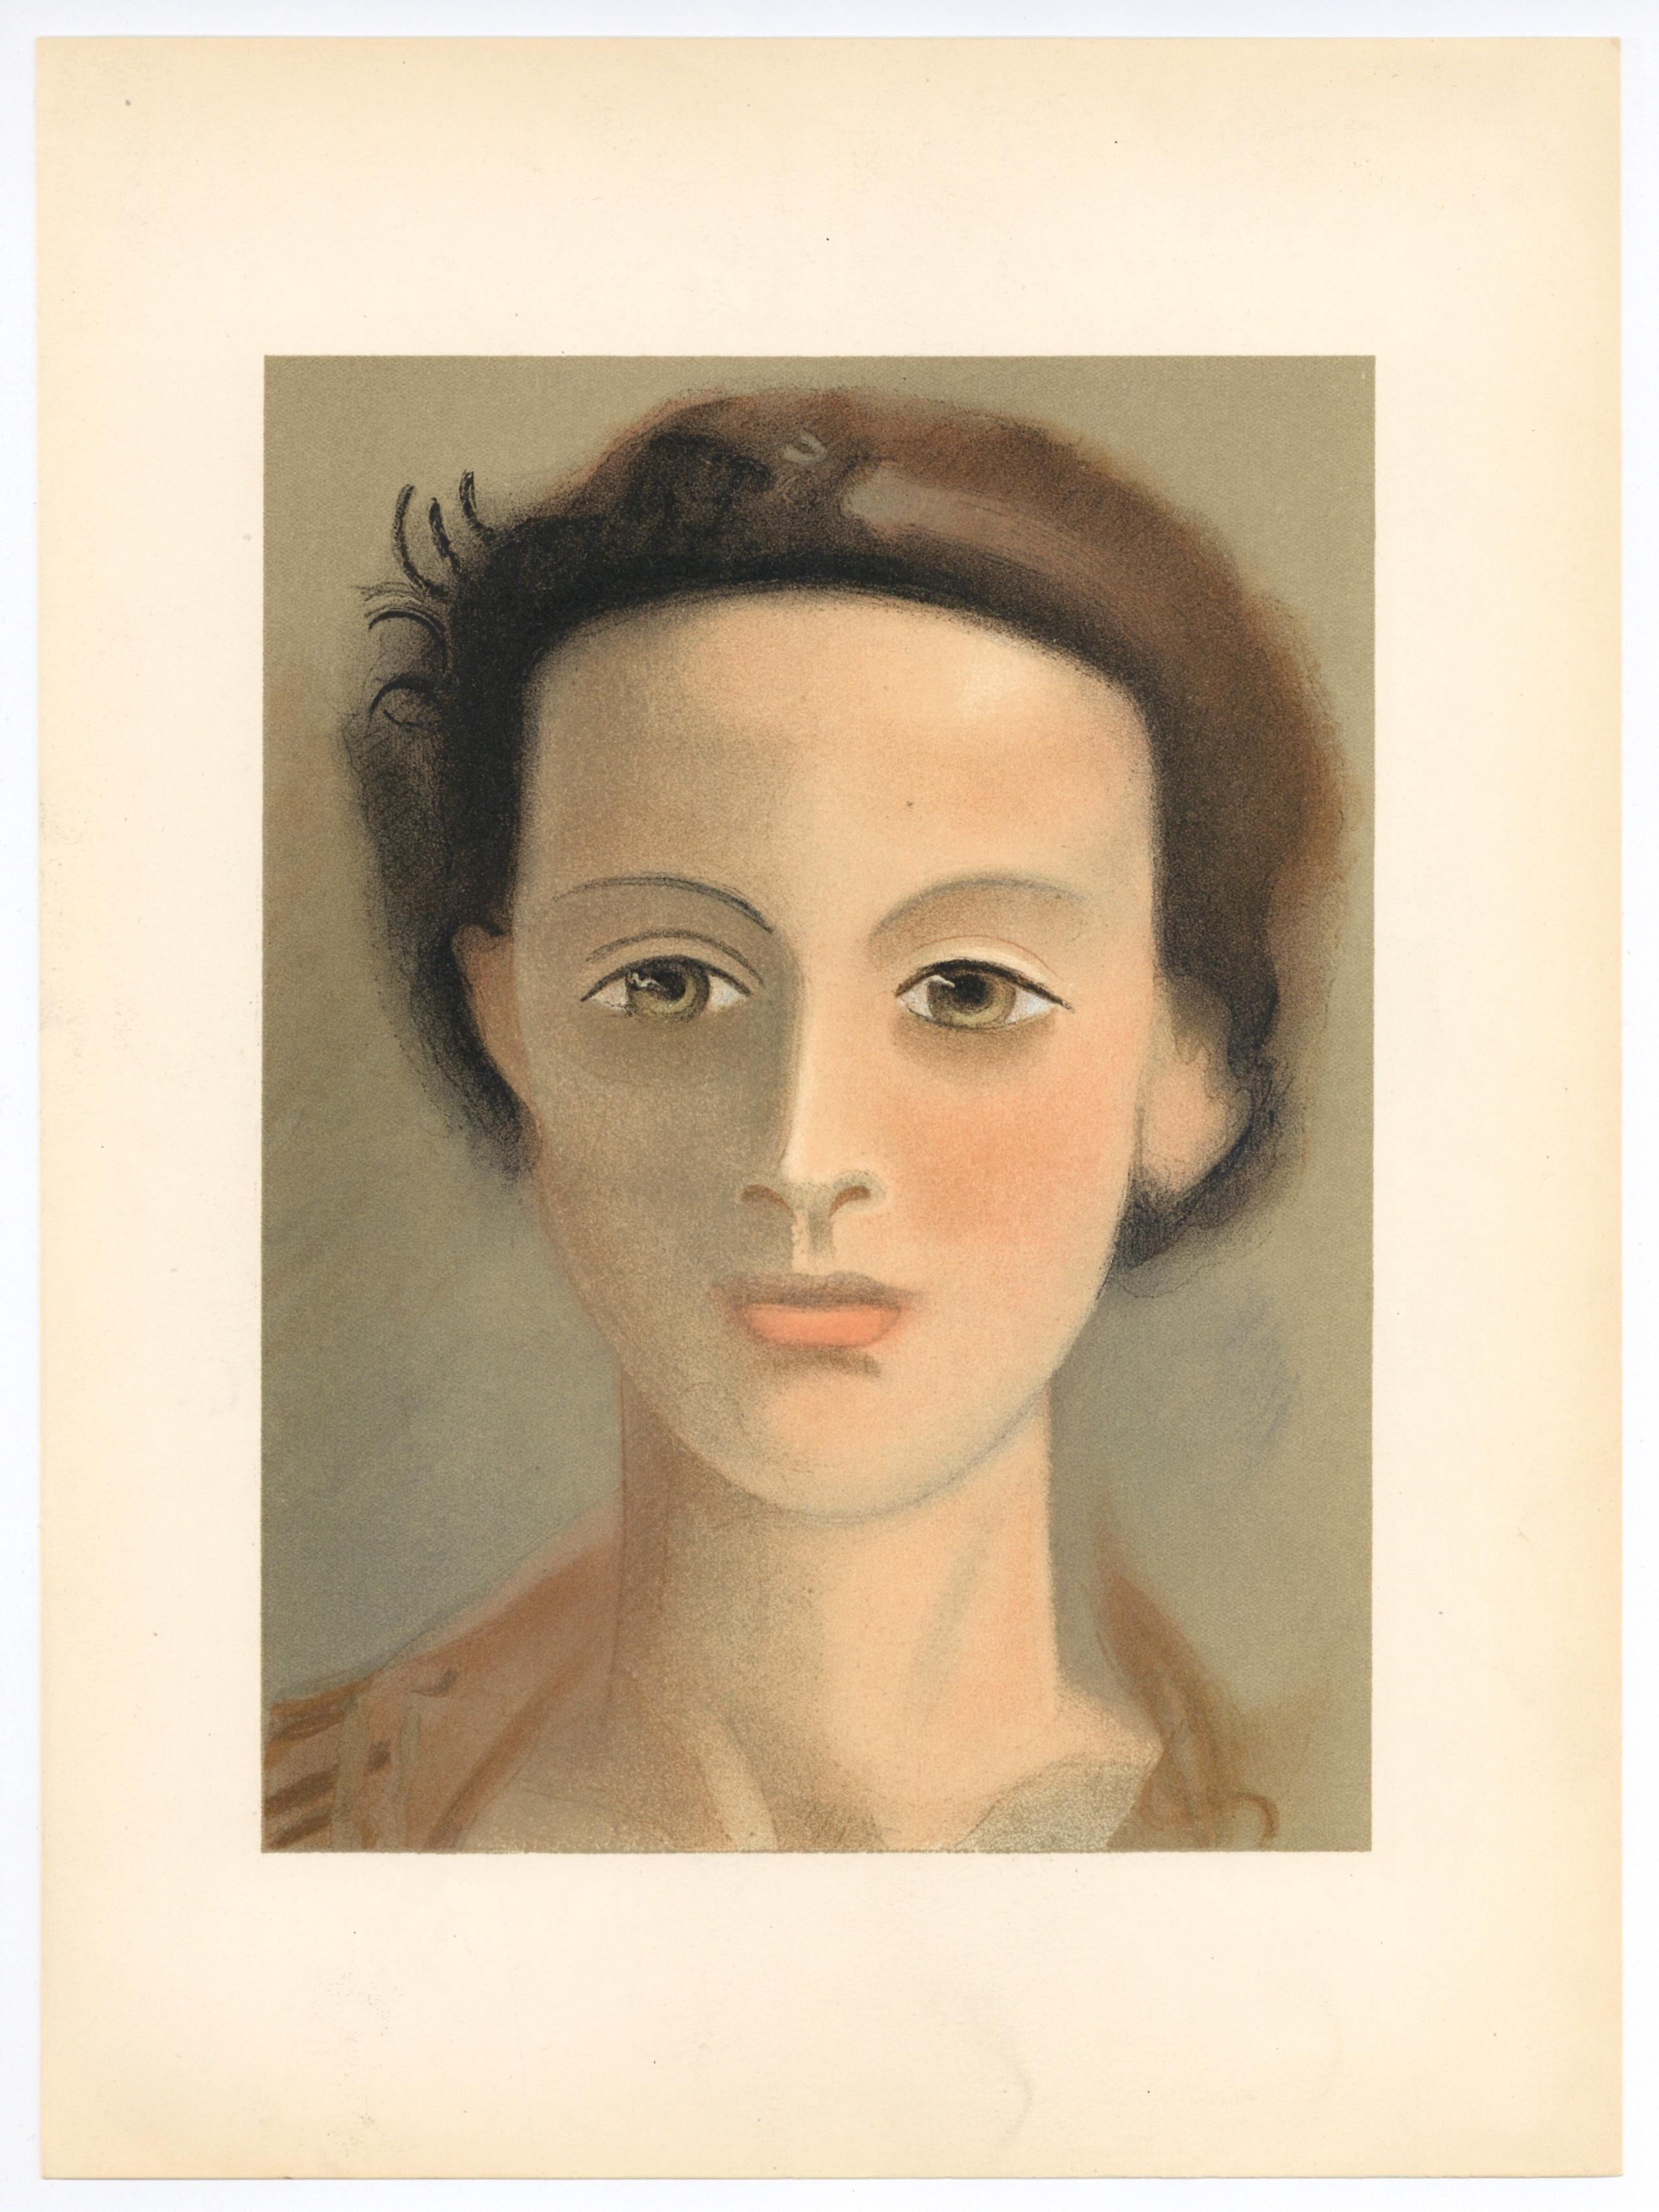 Lithograph on vélin du Marais paper. Inscription: Unsigned and unnumbered, with additional lithography by the artist on verso, as issued. Good condition. Notes: From the volume, Verve: Revue Artistique et Littéraire, Vol. I, N° 5-6,  1939. Printed